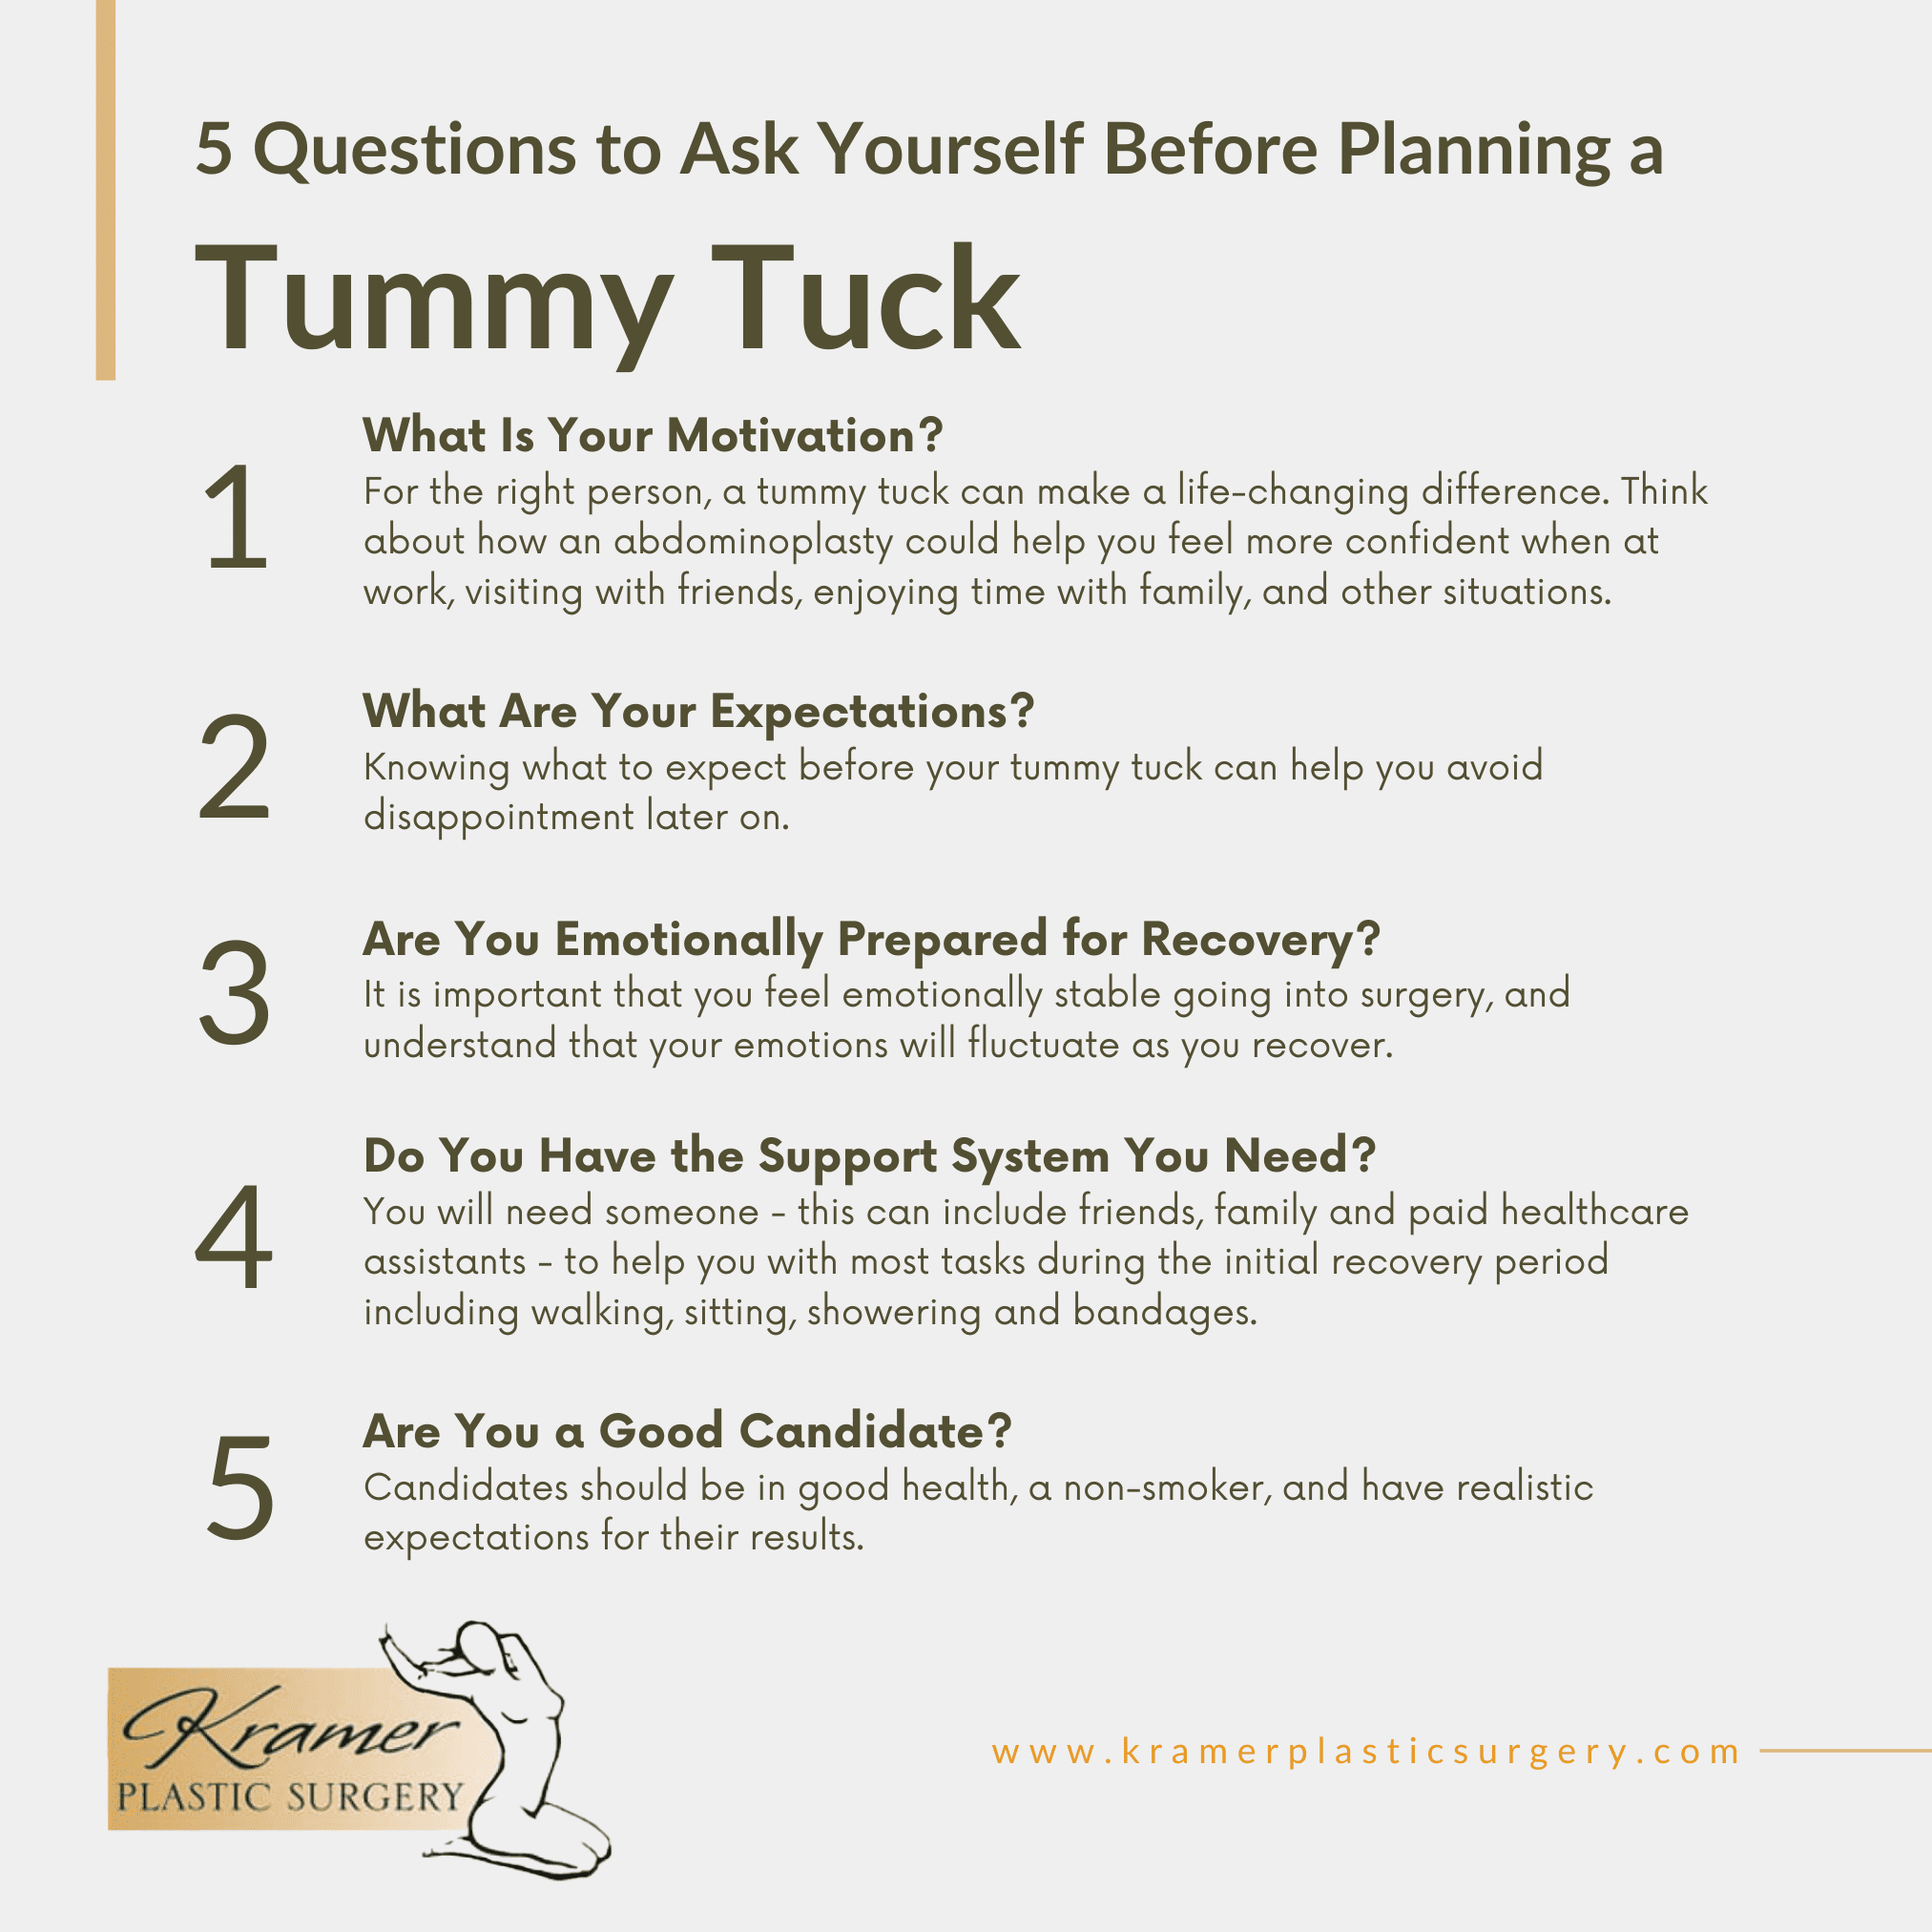 5 Questions to Ask Yourself Before Planning a Tummy Tuck